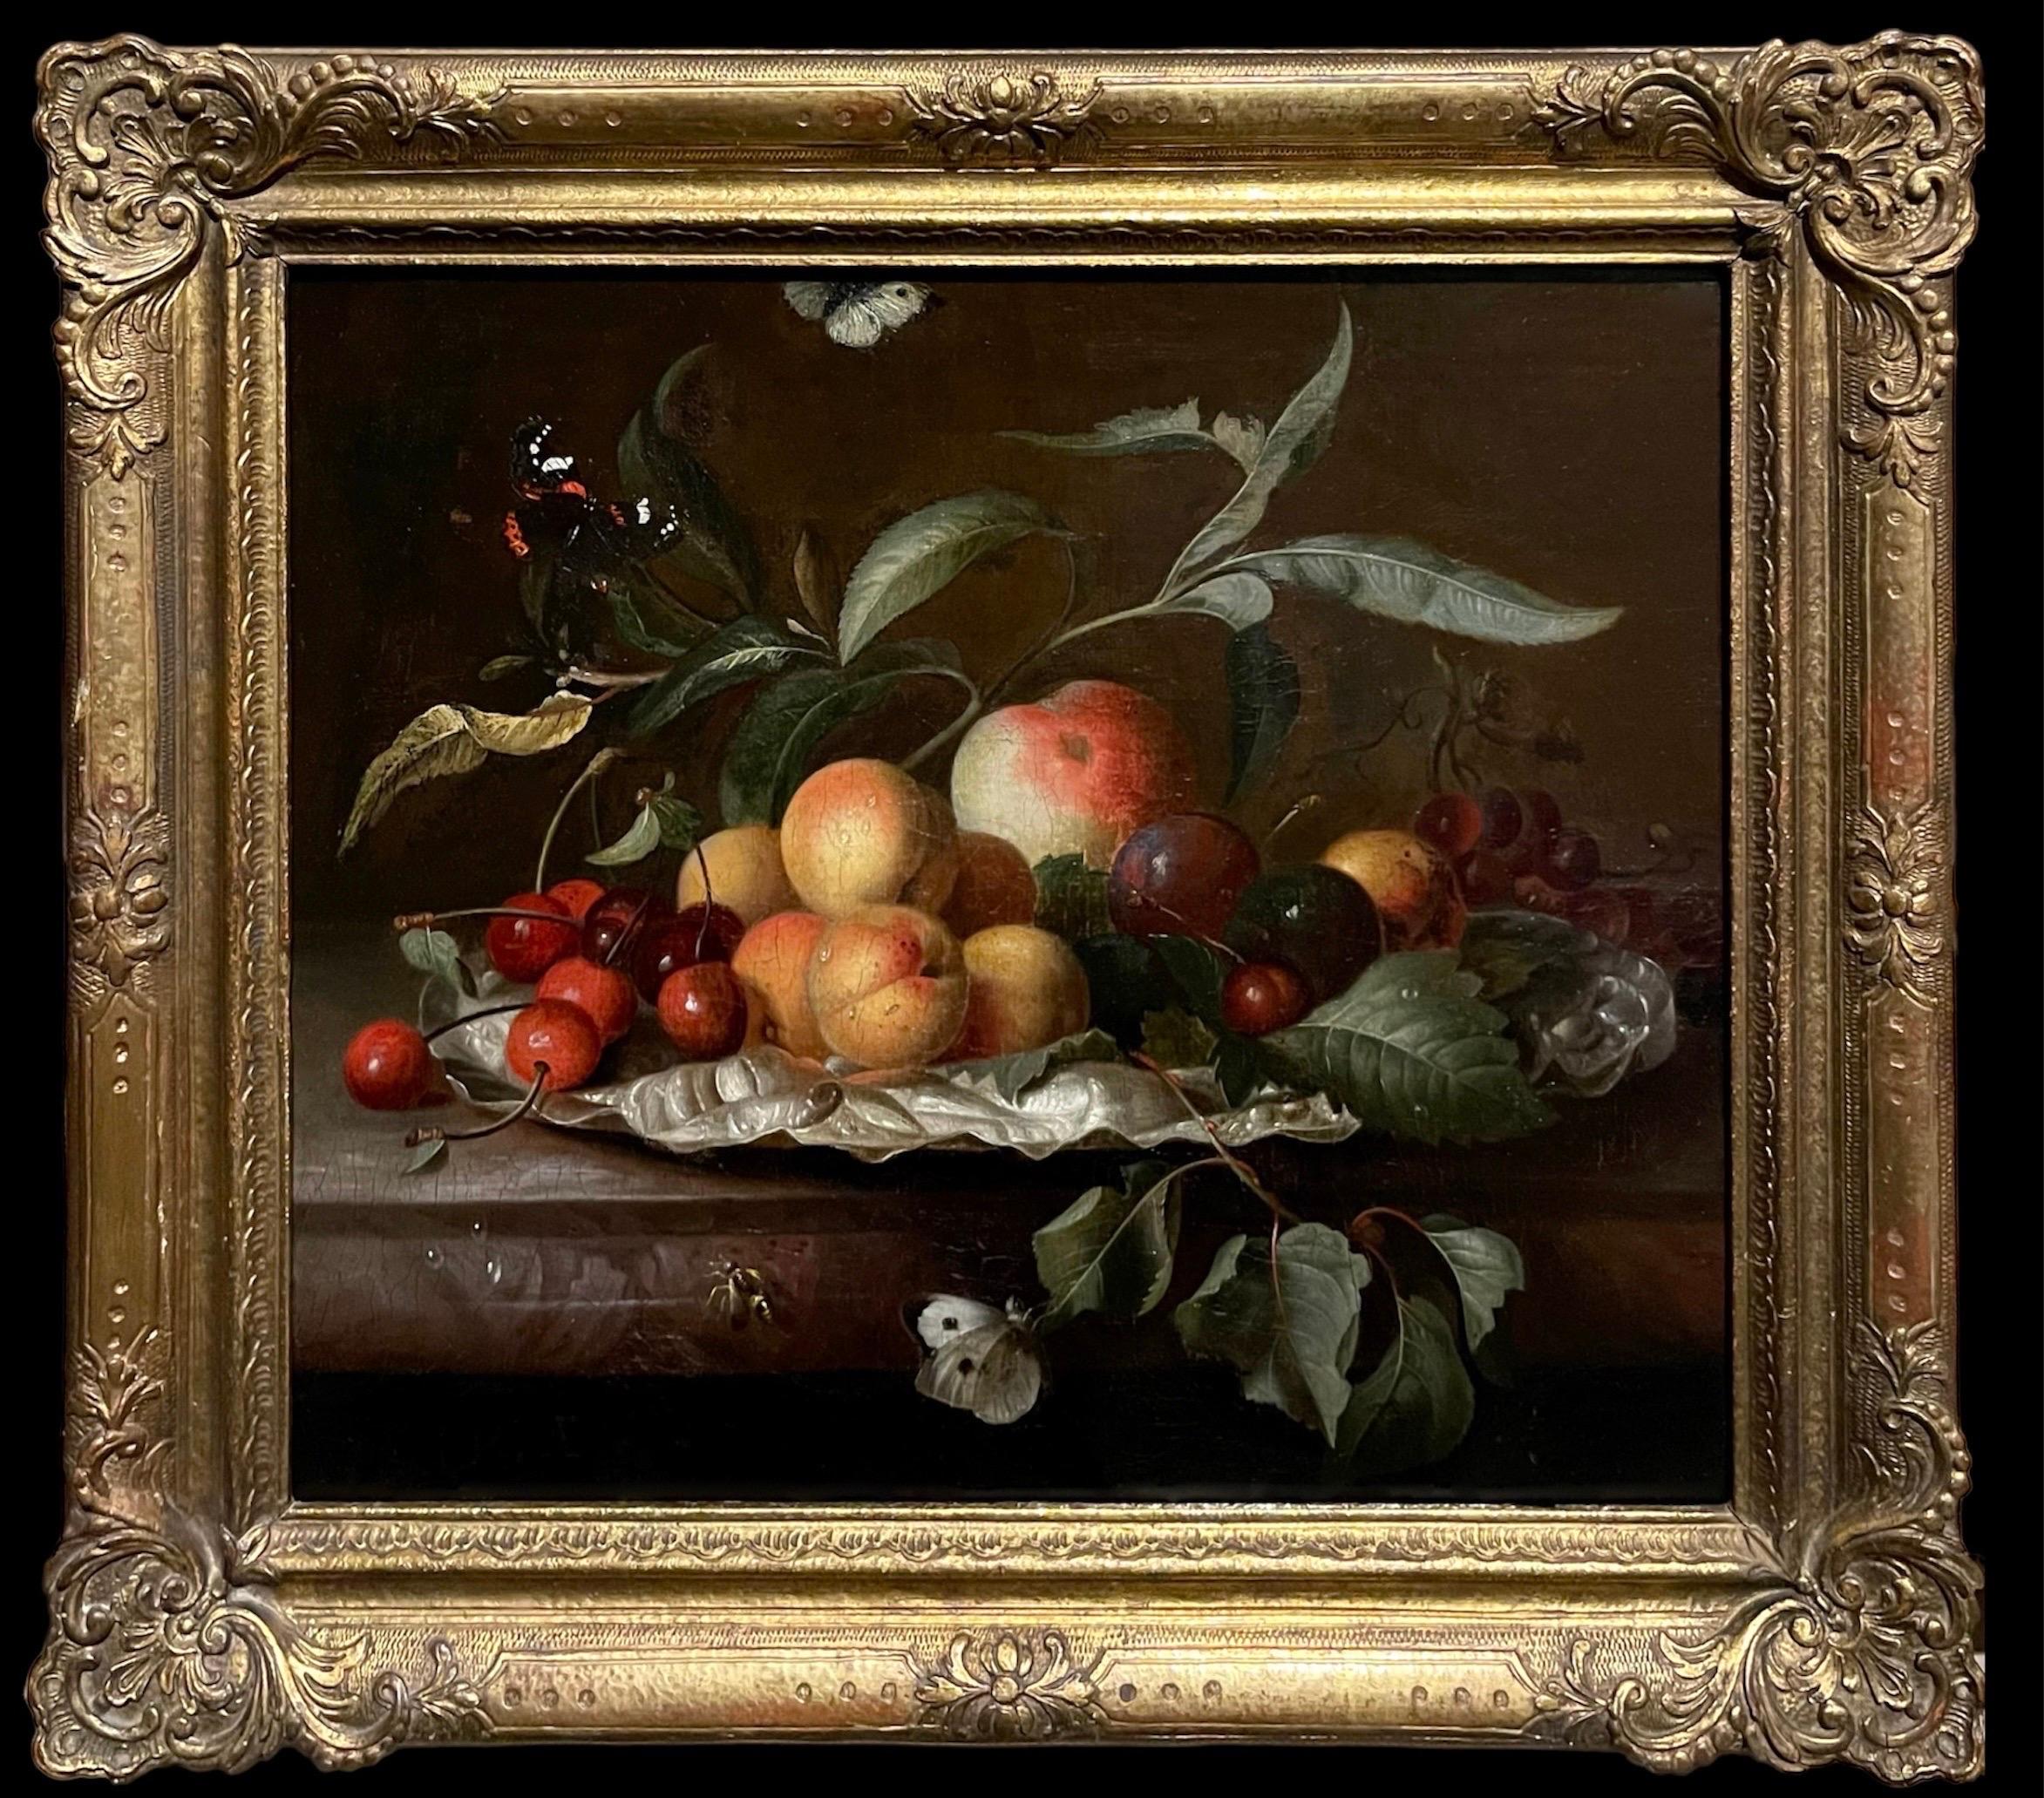 17th century Still-life Fruit on a plate with peaches, cherries and butterflies